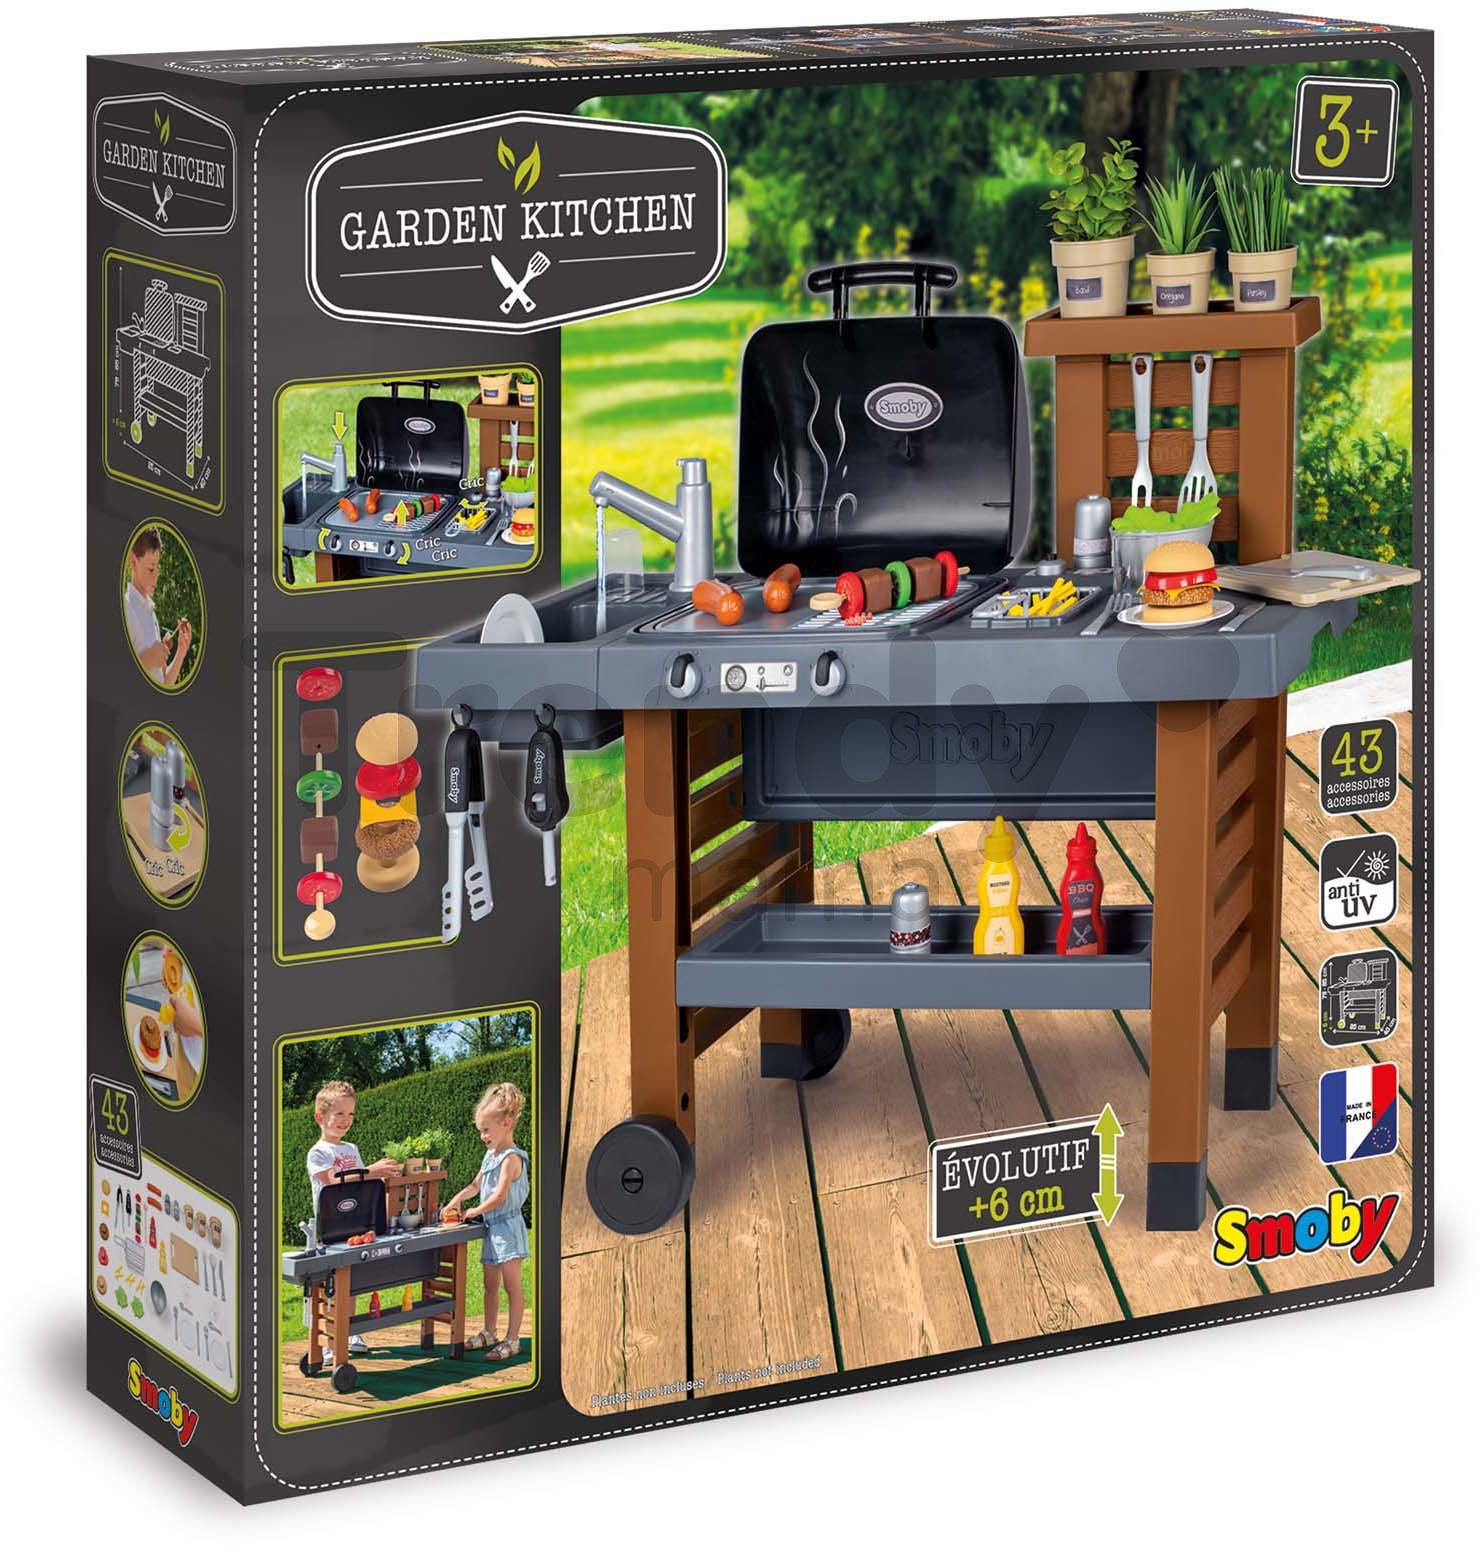  Smoby Garden Kitchen - Outdoor 43 Accessory Play Set